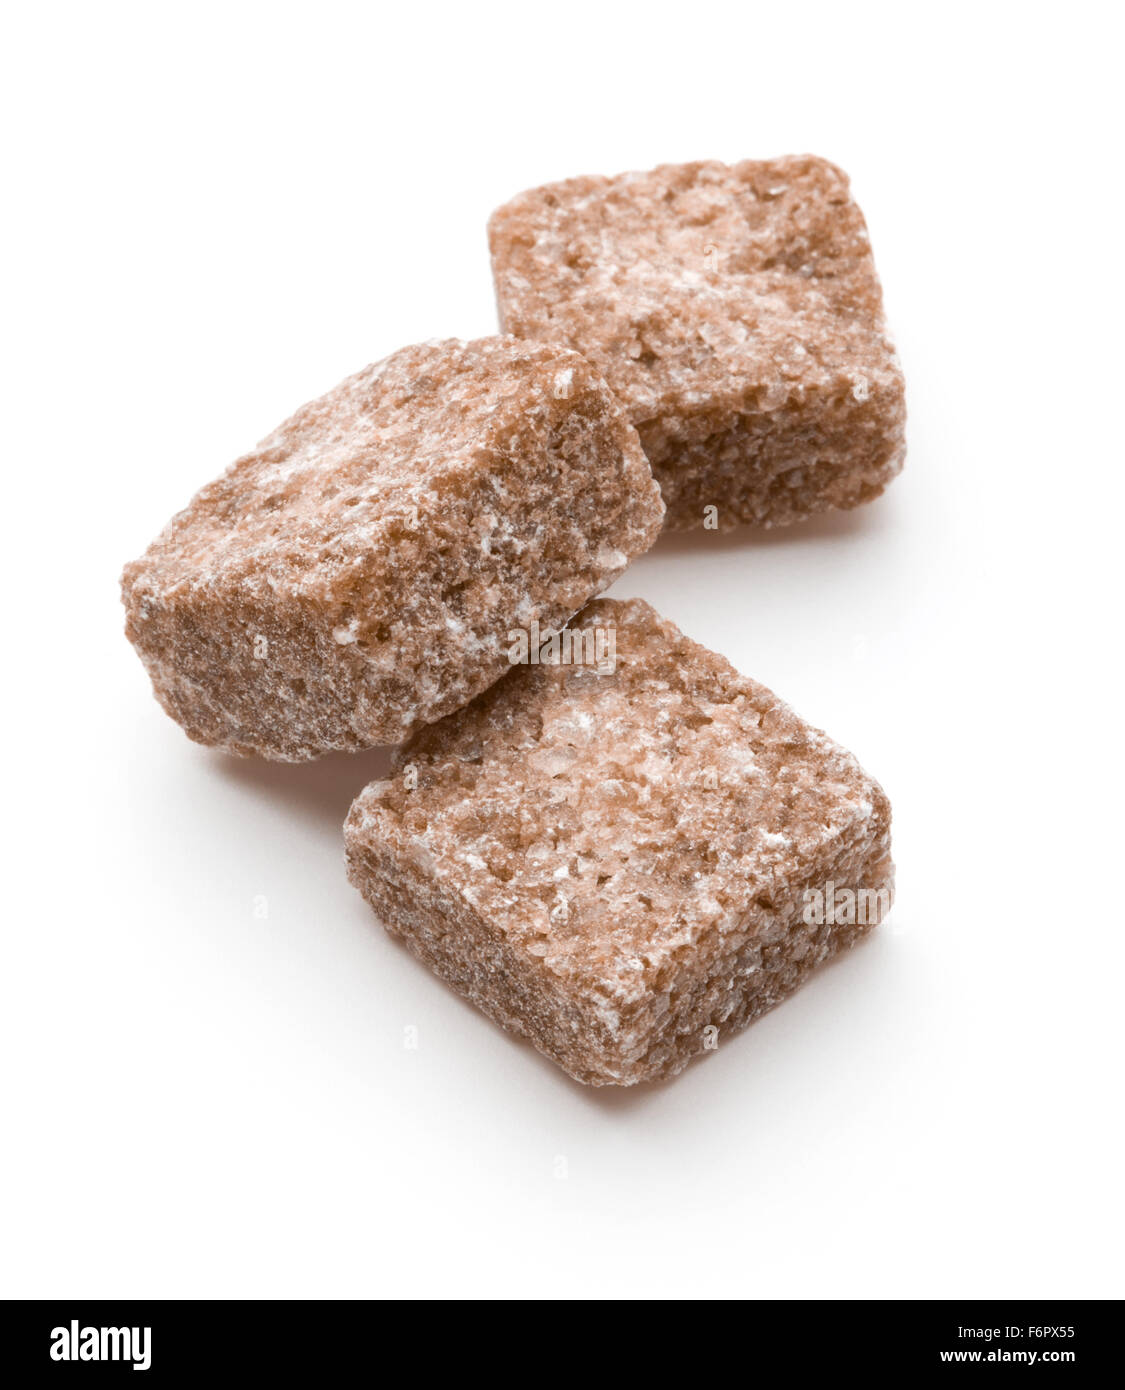 Brown lump cane sugar cube isolated on white background cutout Stock Photo